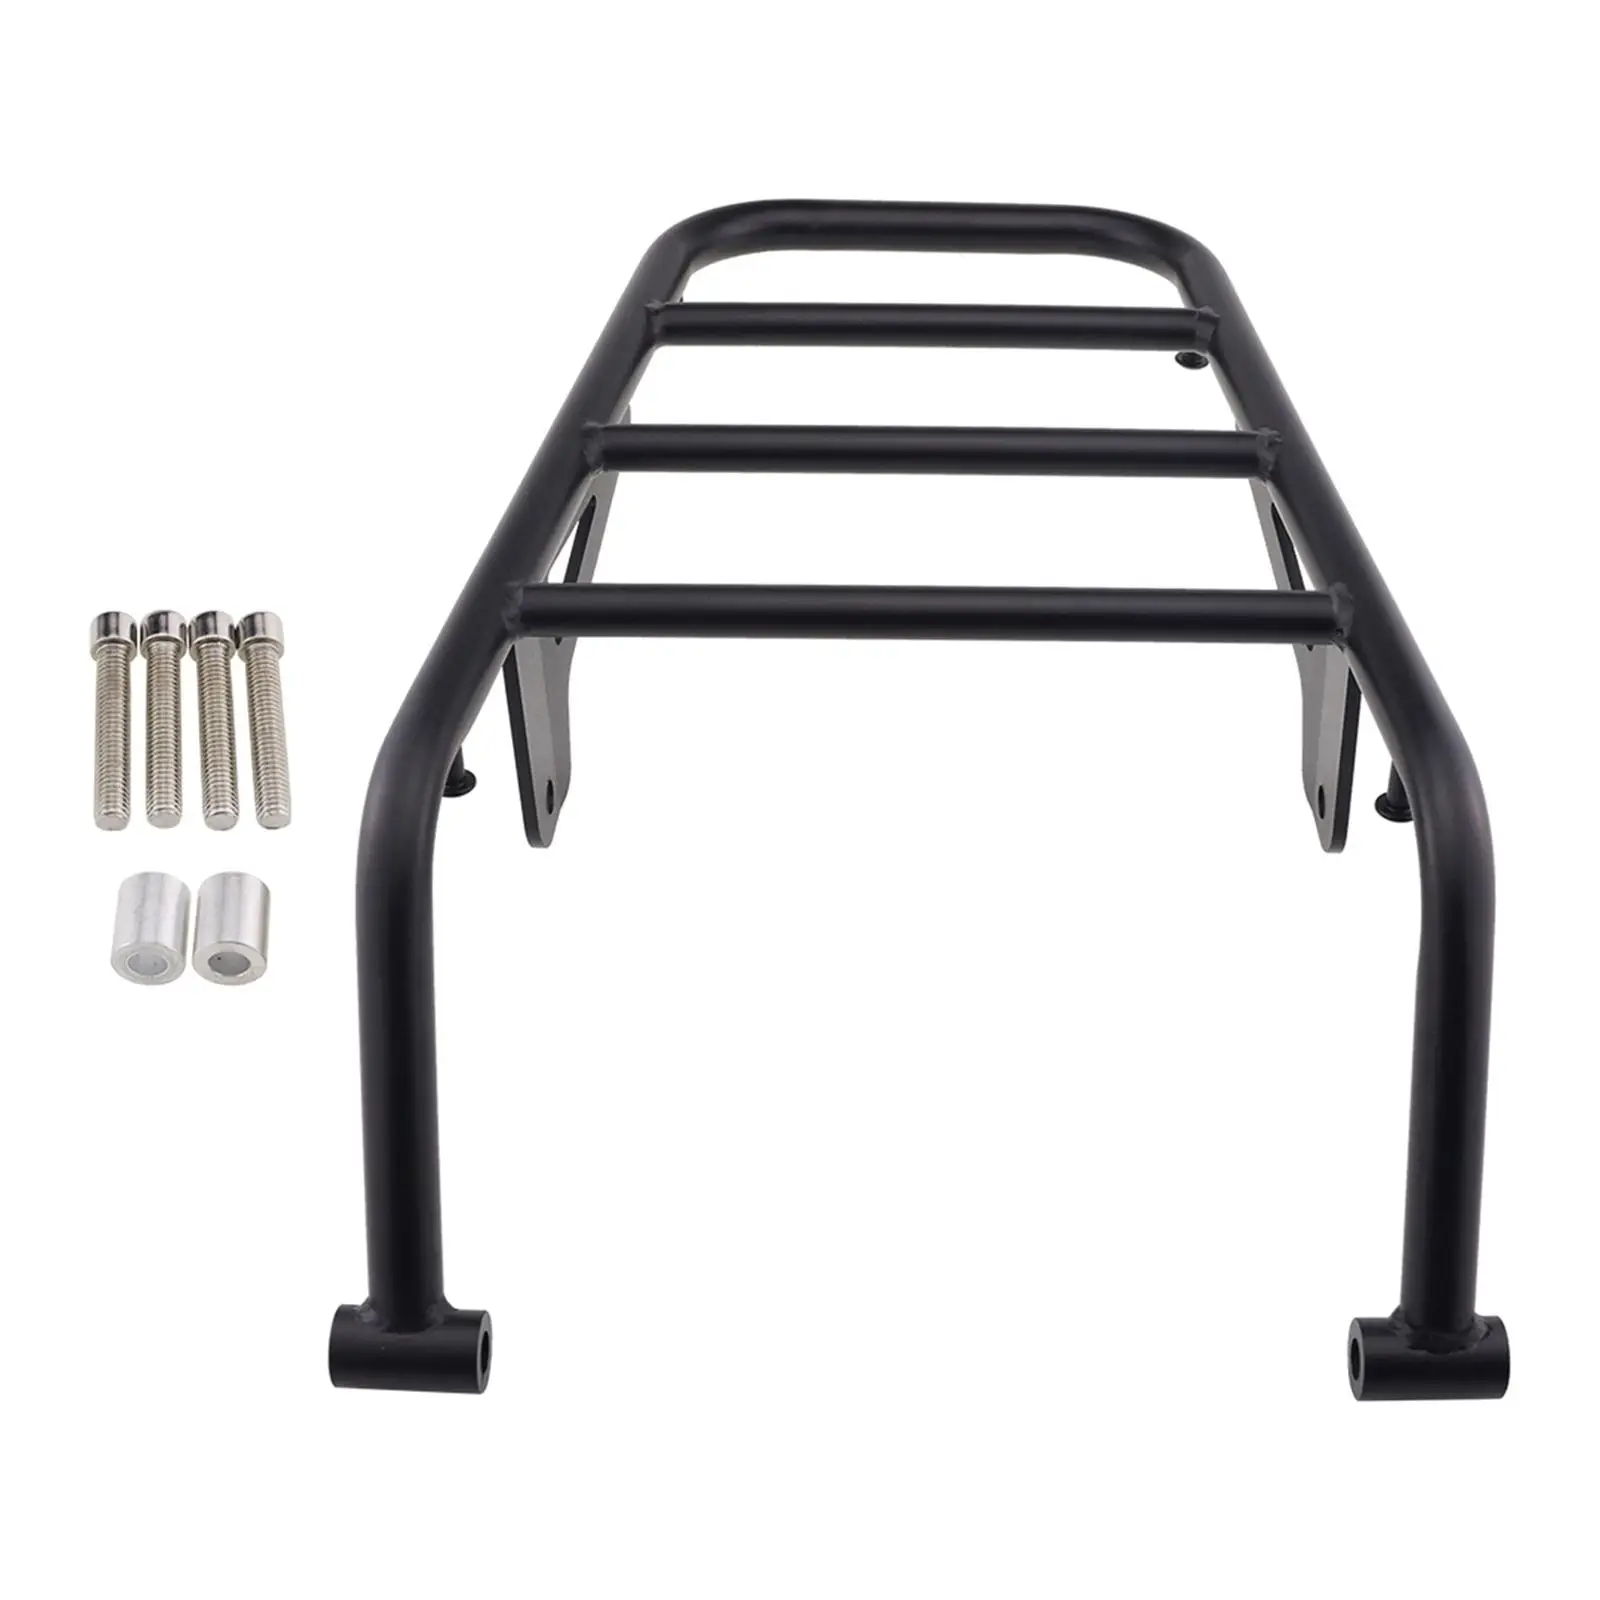 Motorcycle Rear Luggage Rack Support Carrier Shelf Cargo Frame Fits for Yamaha Klx 230/R